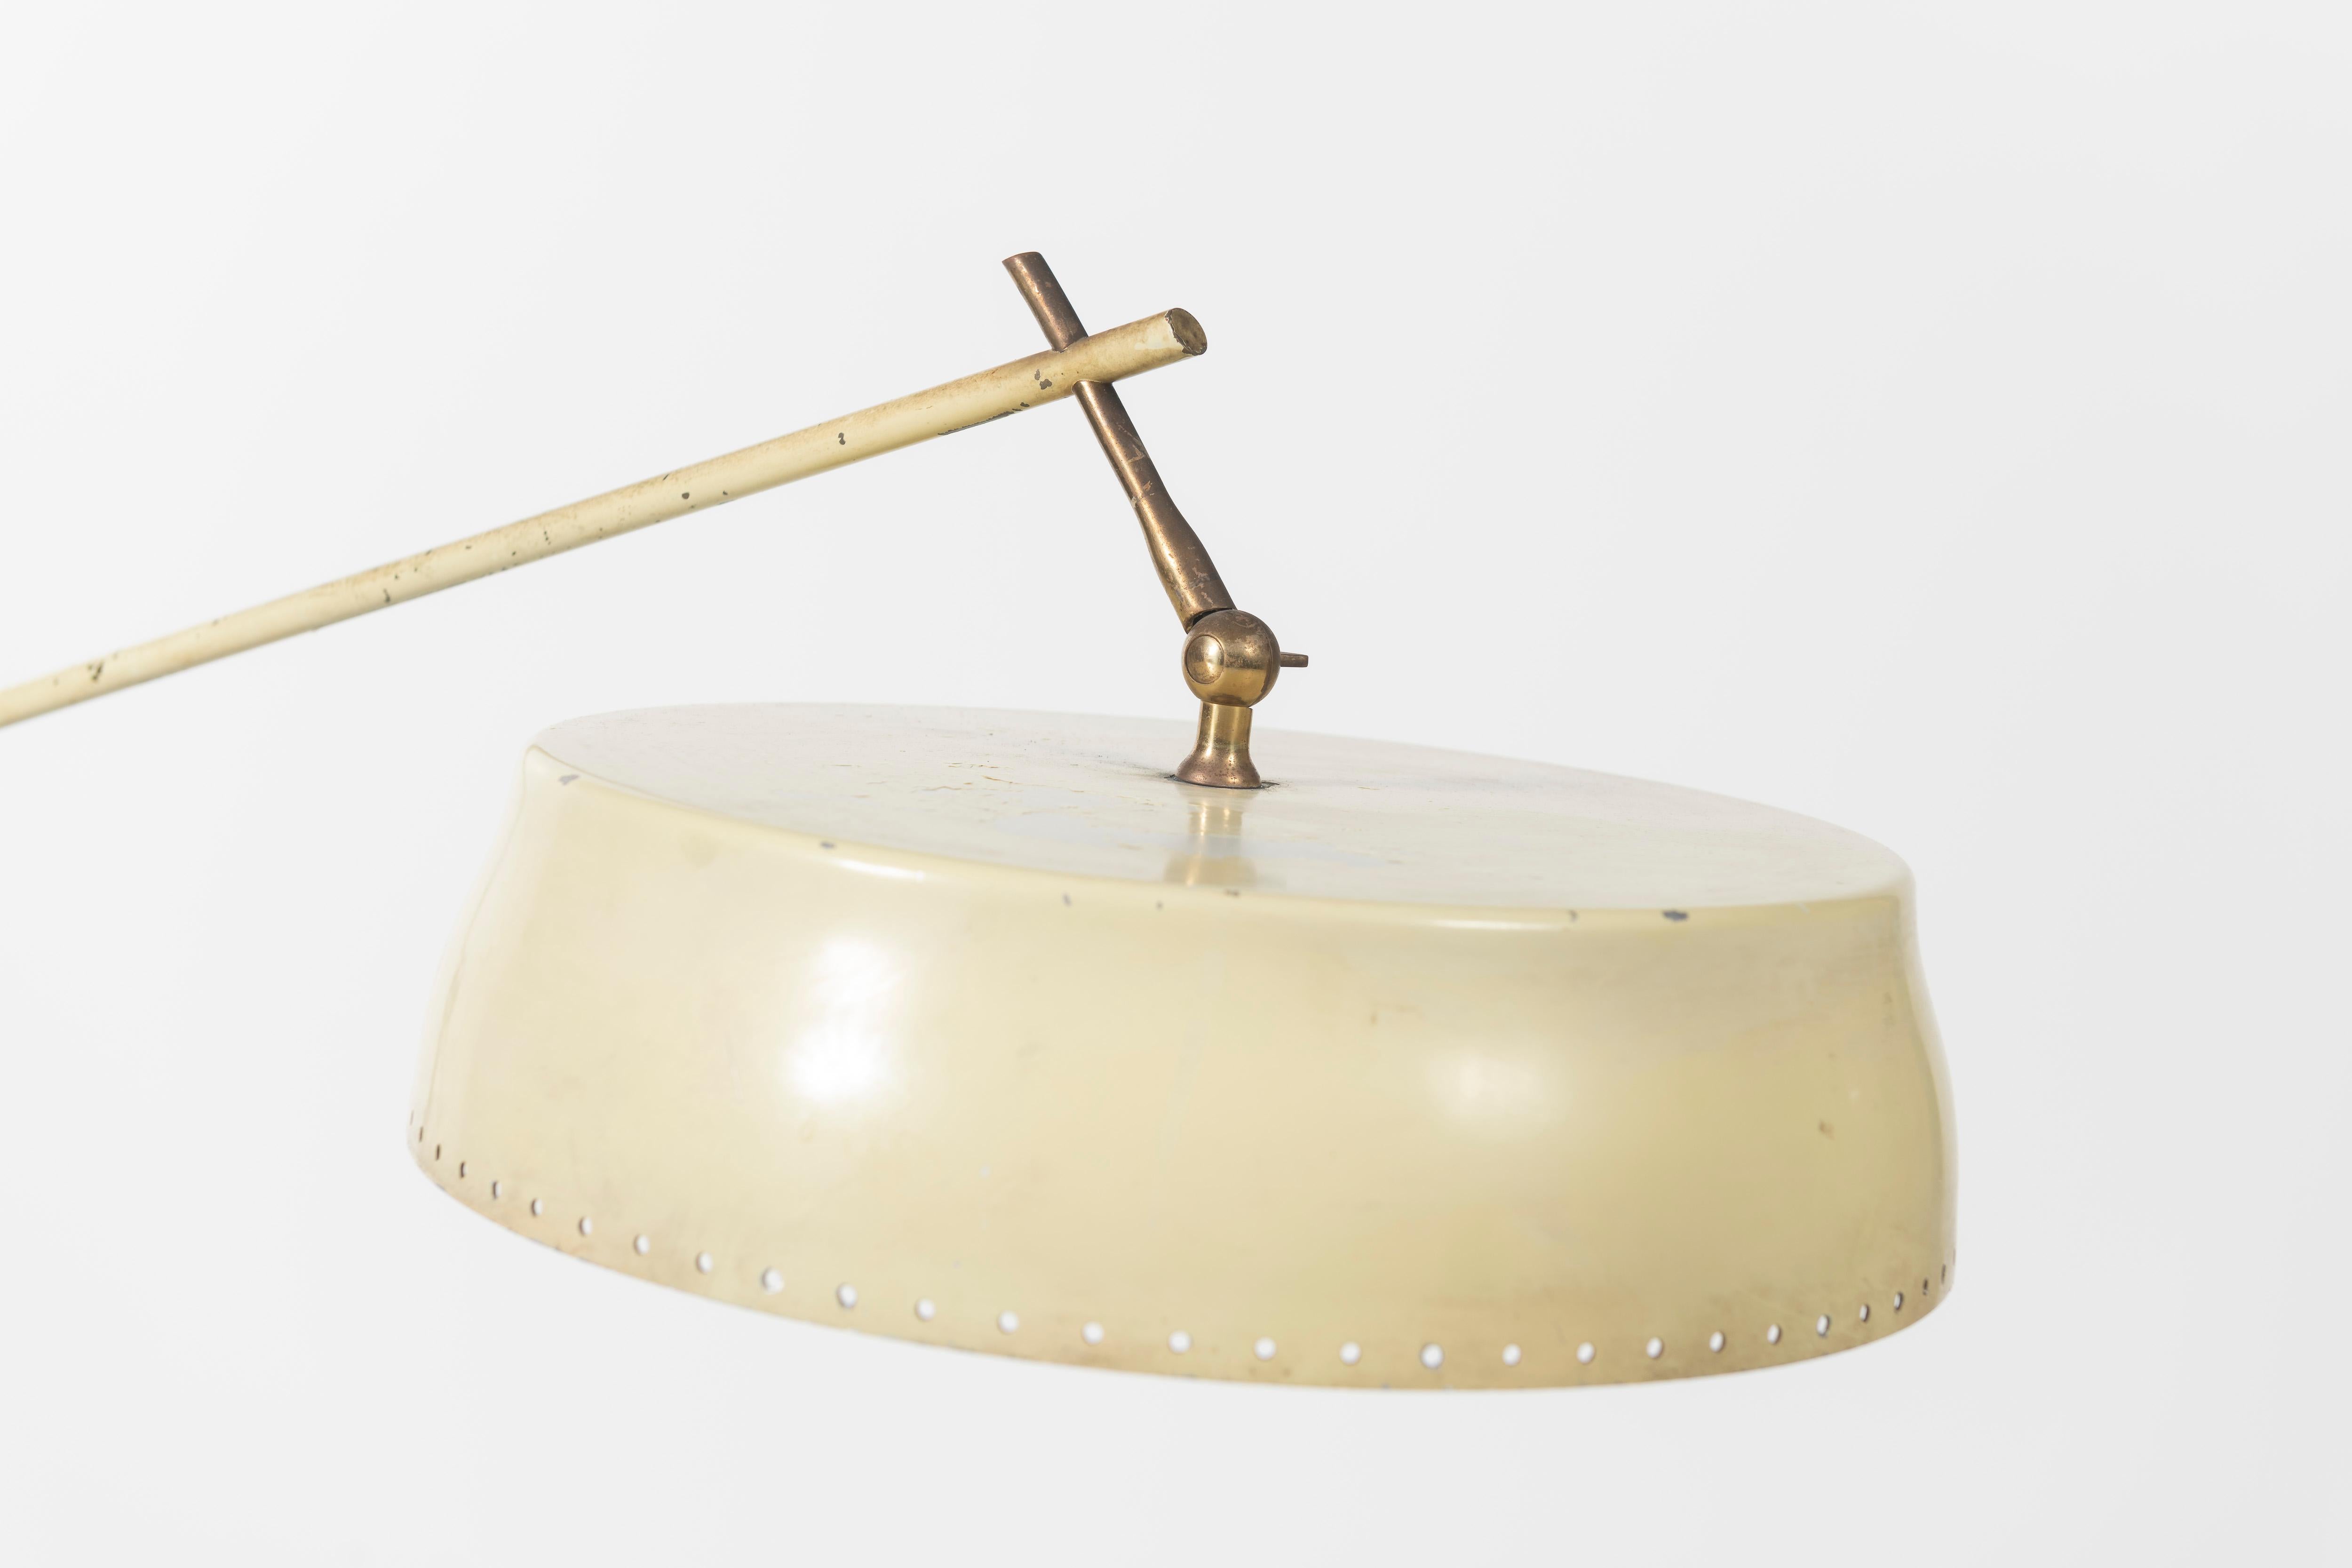 This floor light is designed by Angelo Lelli and made by his company, Arredoluce, in Italy. The cream colored aluminium shade is placed upon a brass articulated arm which is adjustable. The lamp rests on a base of Italian green marble. There is also